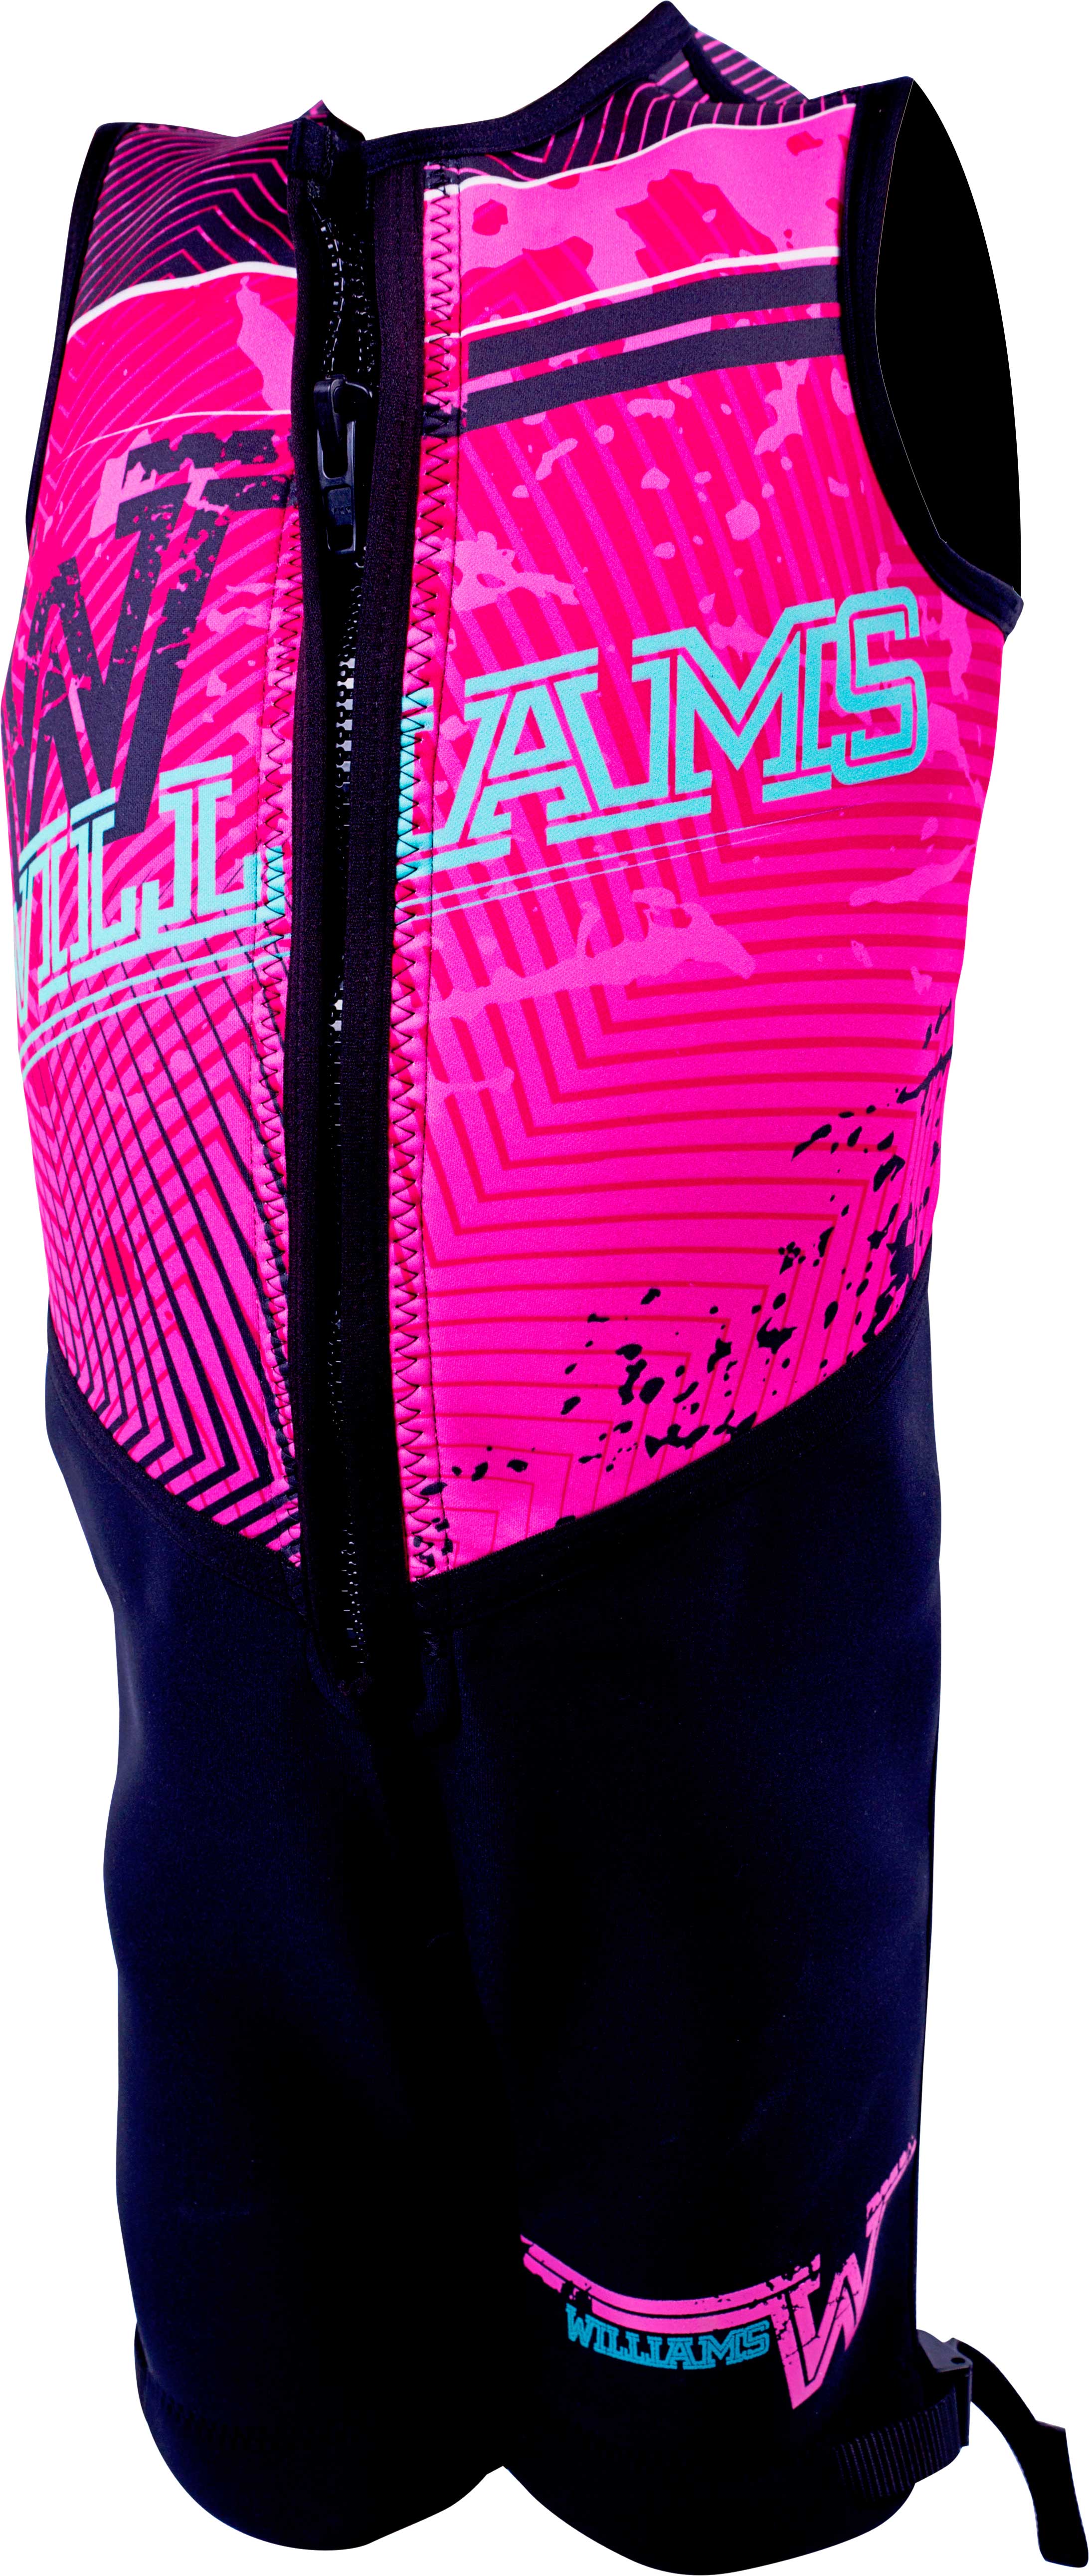 WILLIAMS YOUTH URBAN SPORTS BUOYANCY SUIT - PINK - 18